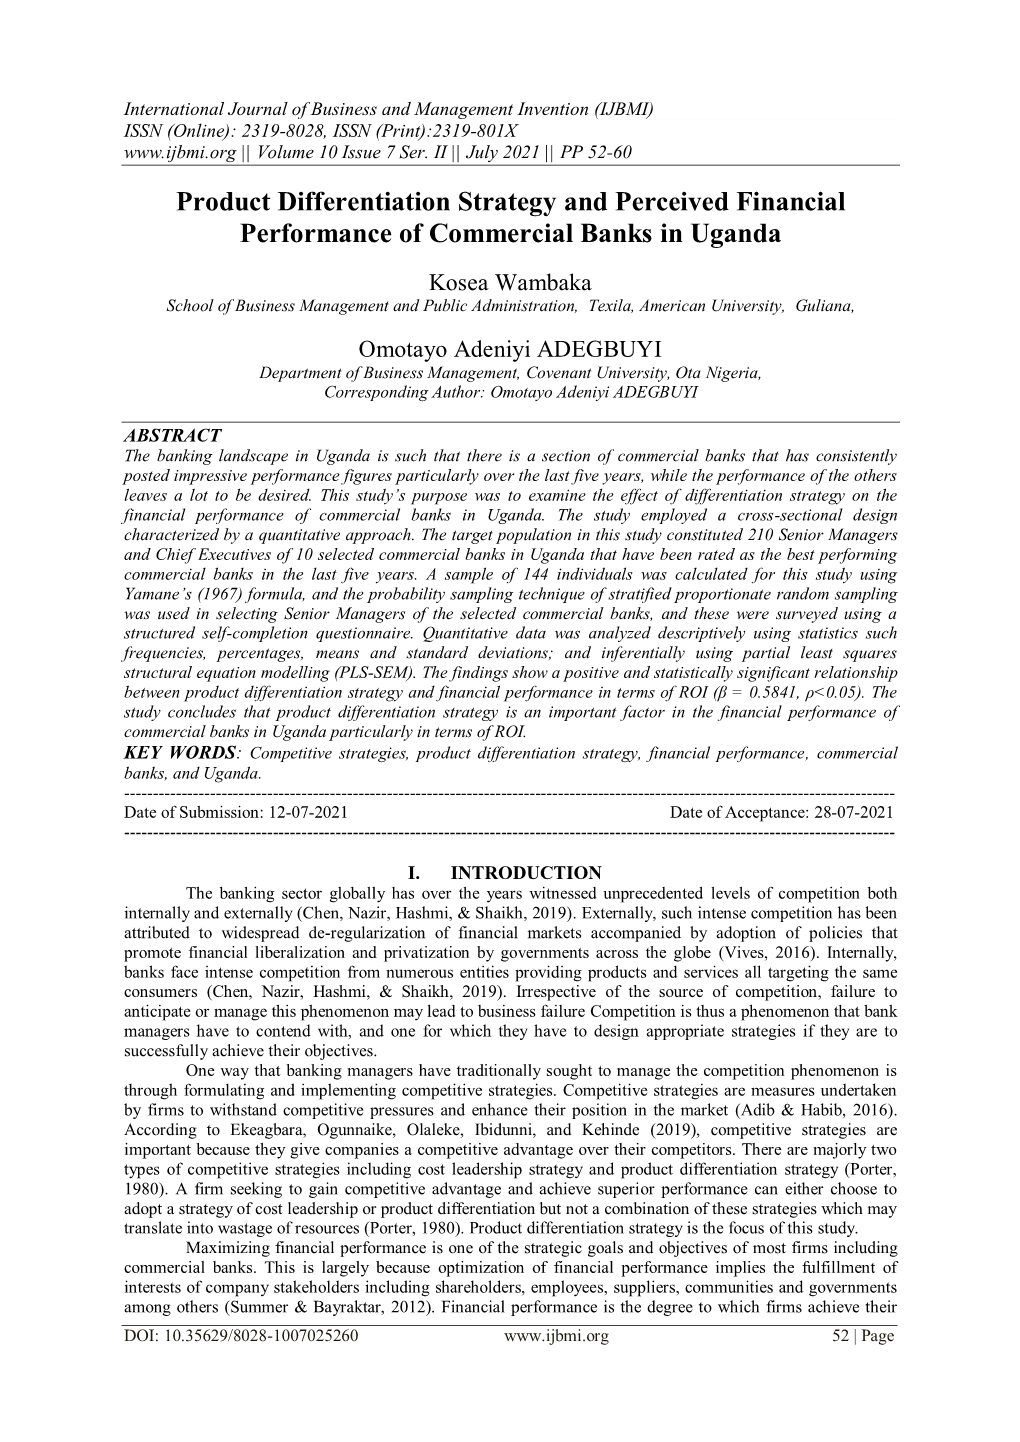 Product Differentiation Strategy and Perceived Financial Performance of Commercial Banks in Uganda